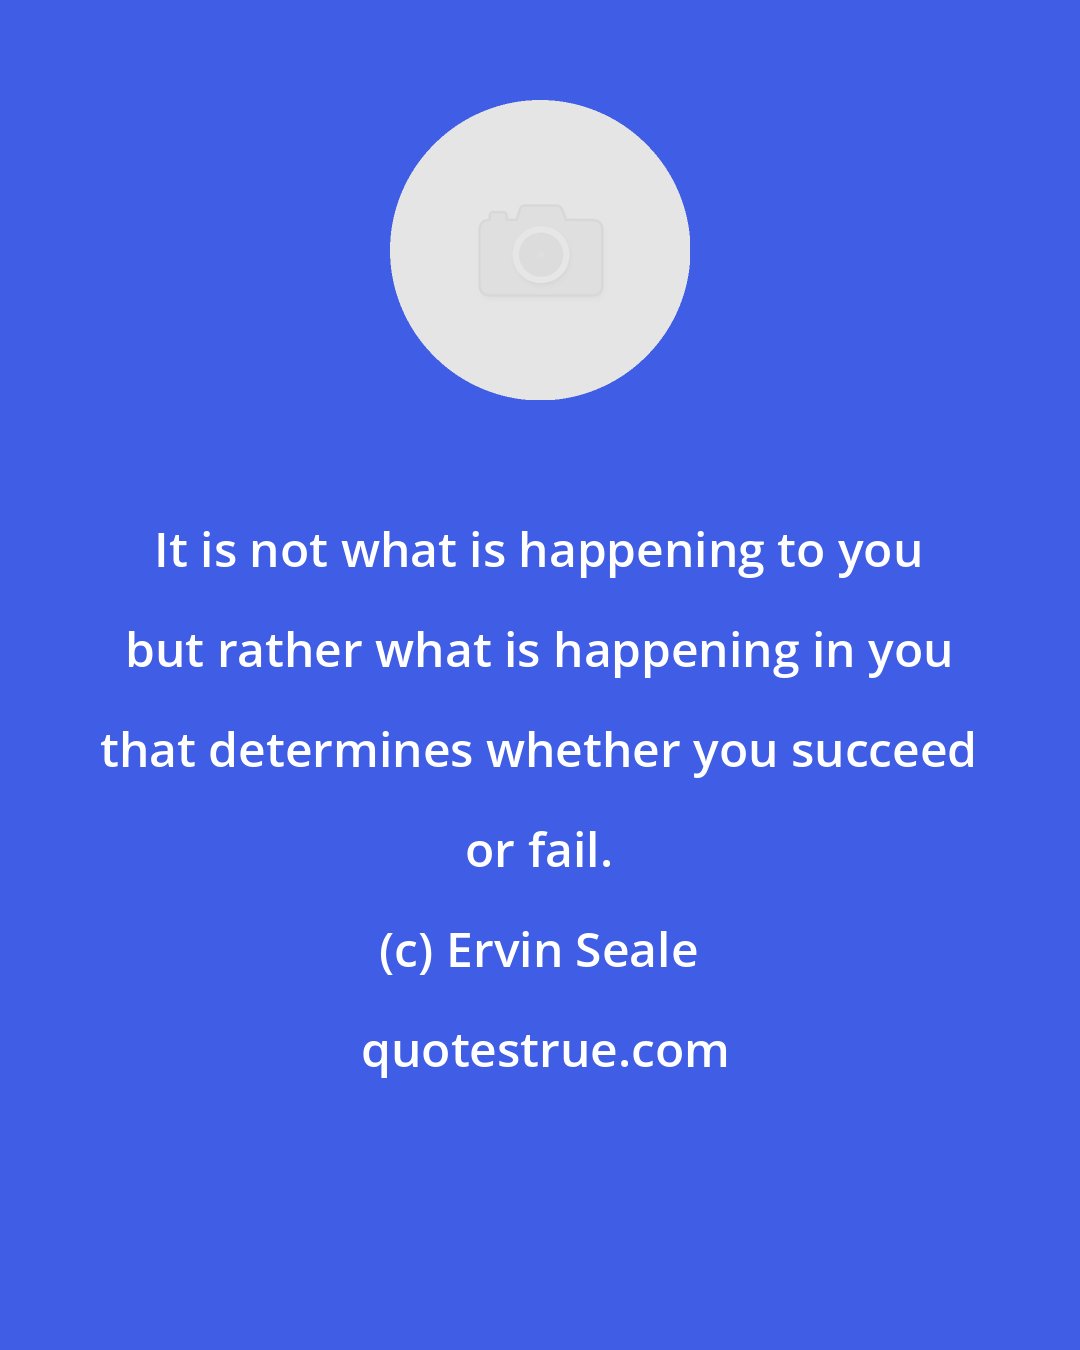 Ervin Seale: It is not what is happening to you but rather what is happening in you that determines whether you succeed or fail.